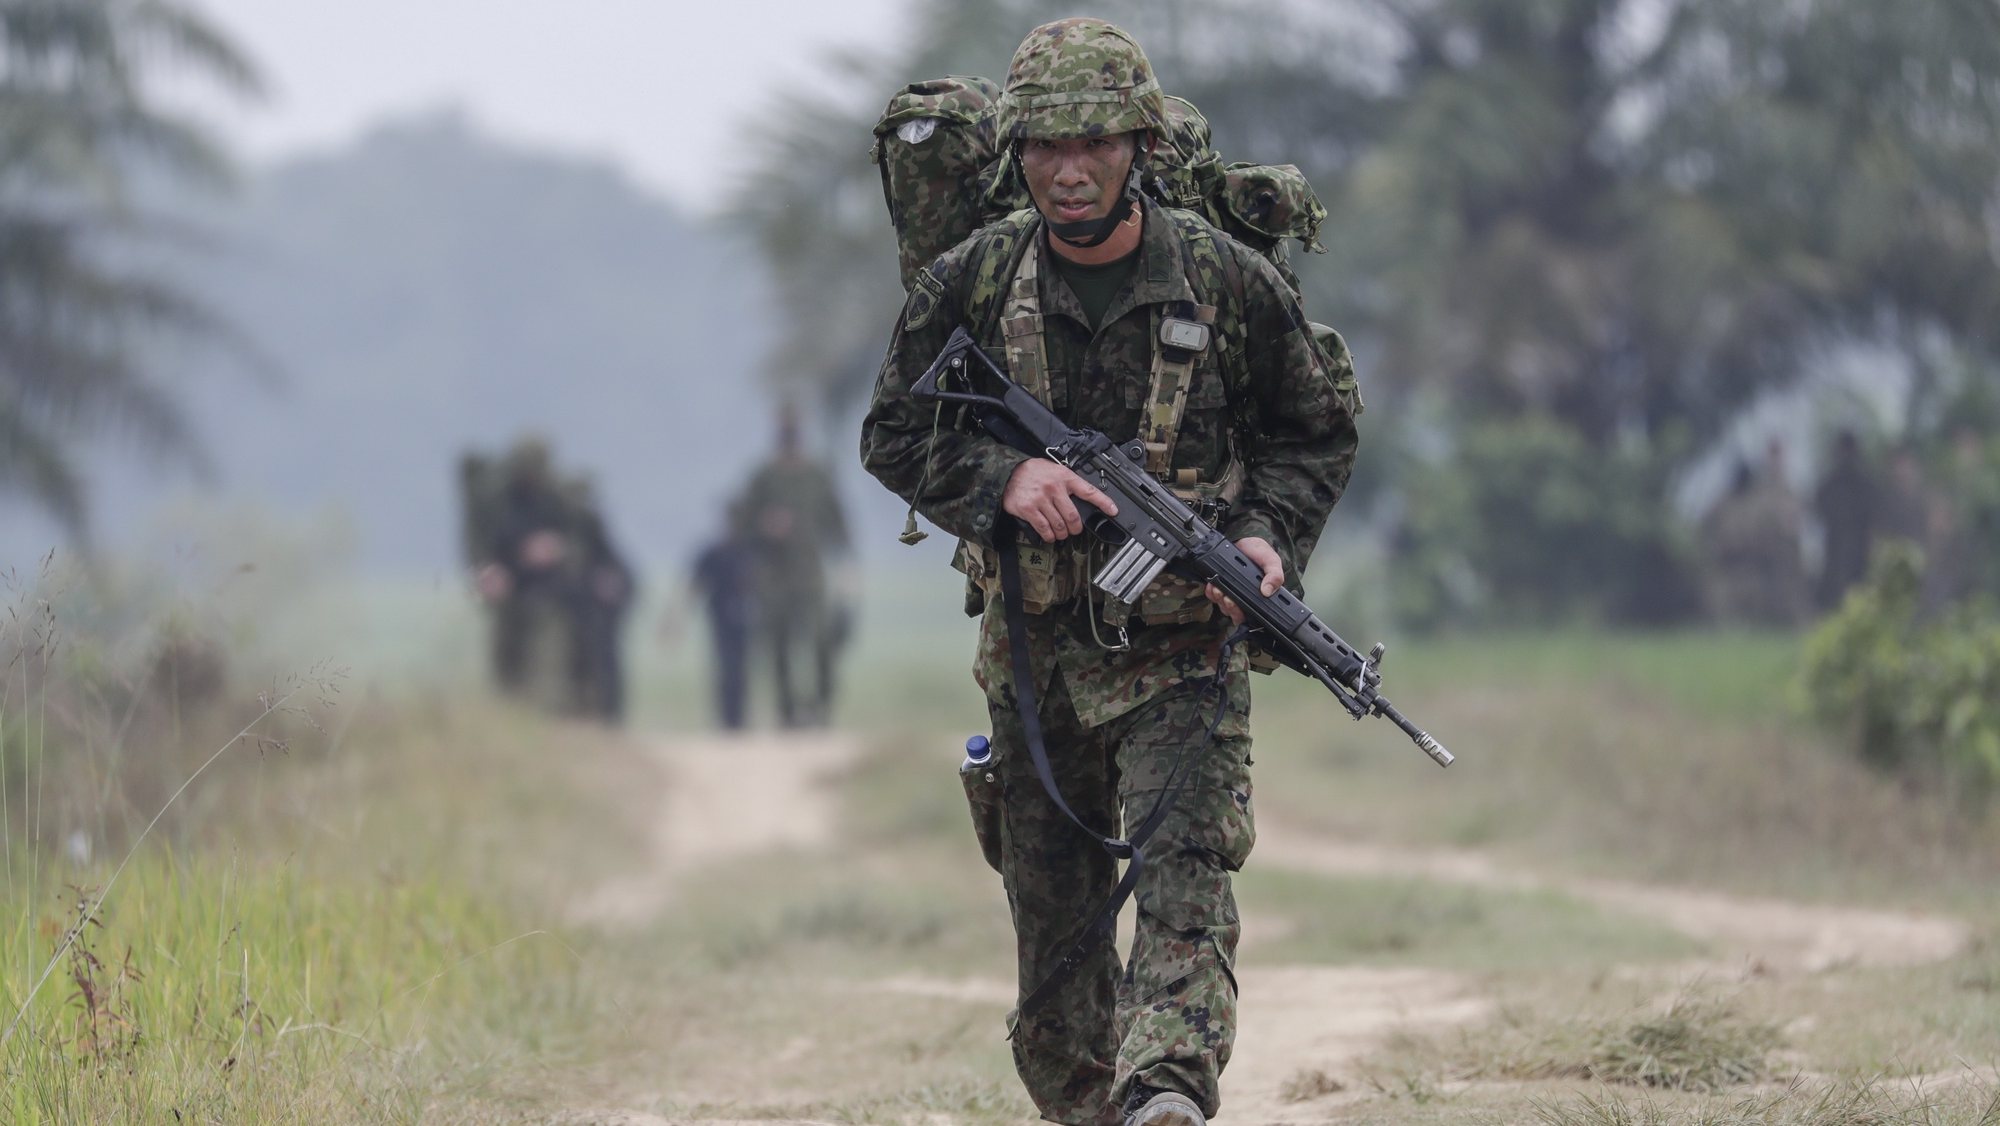 epa10103646 A member of Japan Ground Self-Defense Force carries his rifle during the Super Garuda Shield joint military drill in Baturaja, South Sumatra, Indonesia, 03 August 2022. Indonesia, US, Australia, Japan and Singapore staged a joint military drill to tighten military relationships between the countries amid the rising tensions in the region, following the visit of the US House Speaker Nancy Pelosi to Taiwan.  EPA/MAST IRHAM